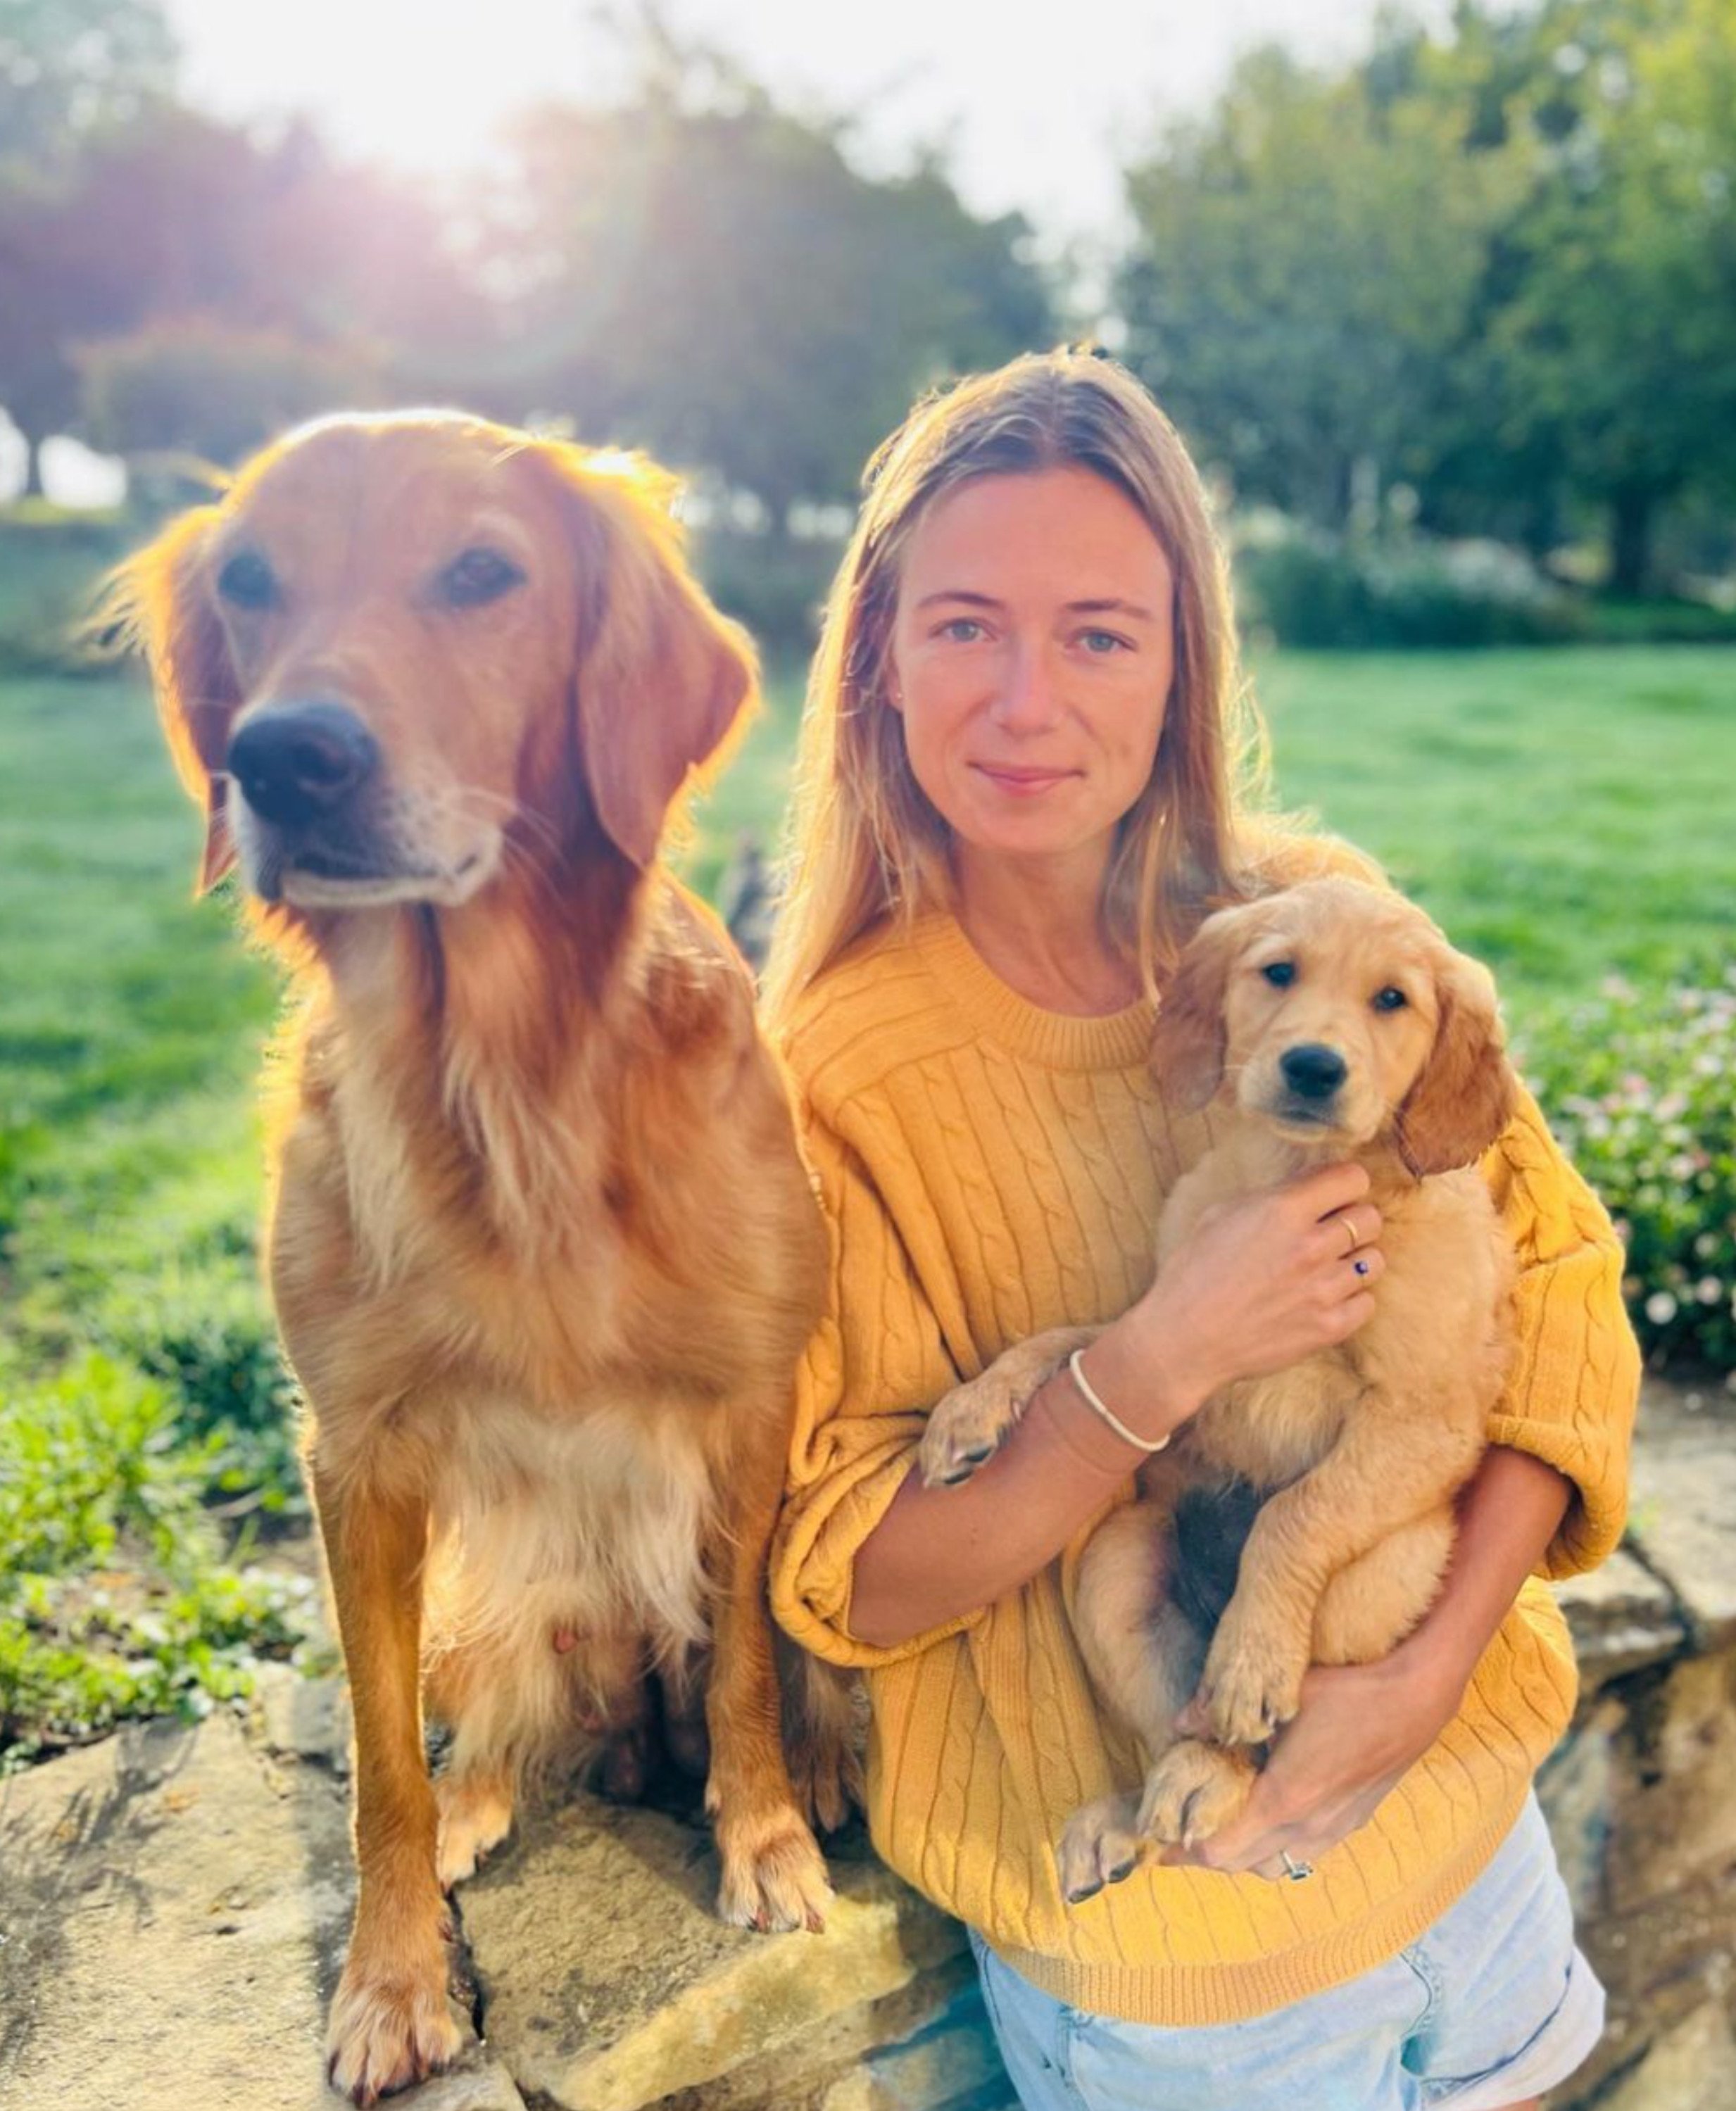 Alizee Thevenet, James Middleton’s wife and Kate Middleton’s sister-in-law, loves dogs. Photo: @jmidy/Instagram